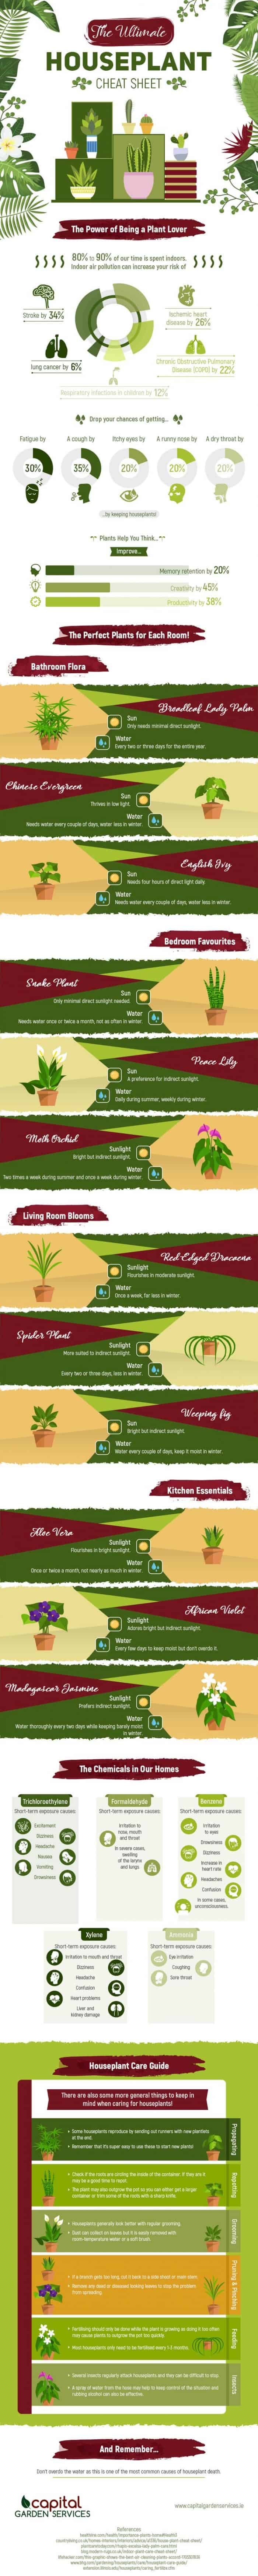 a list of types of houseplants, their benefits, and how to take care of them